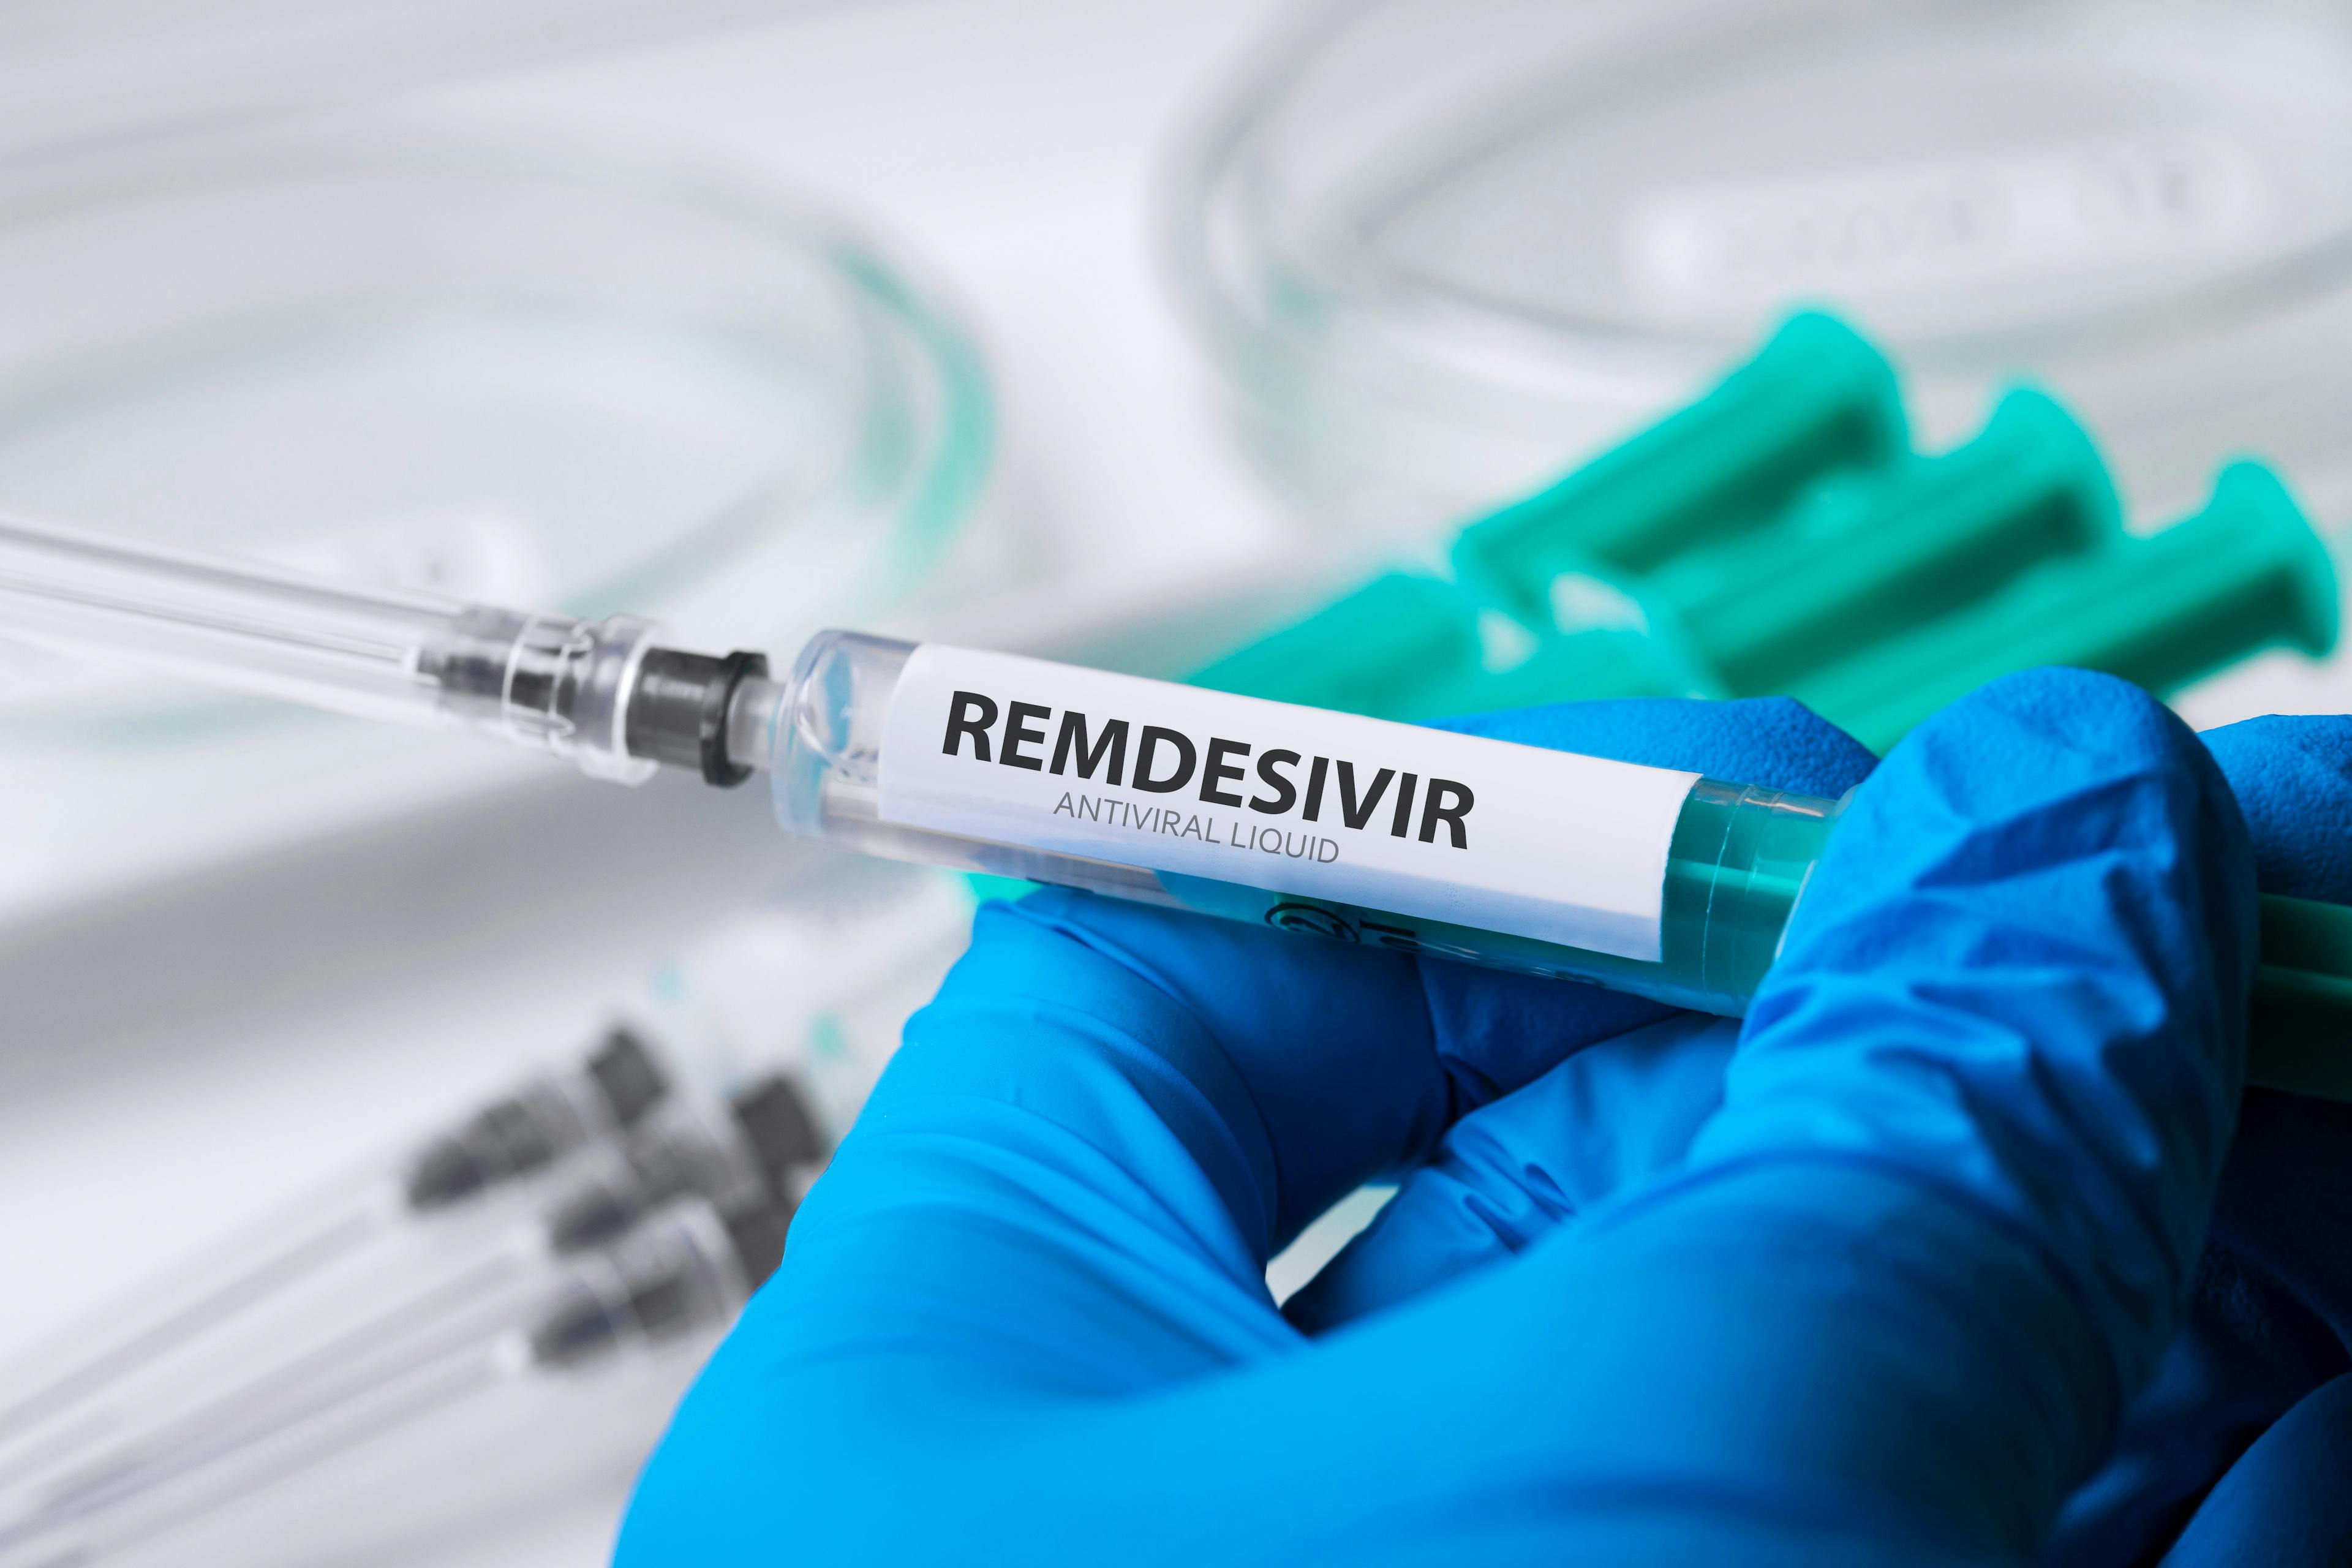 Remdesivir was approved by the US Food and Drug Administration (FDA) to treat hospitalized COVID-19 patients. However, one study, presented virtually at the 51st Critical Care Congress, questioned whether it was truly effective. Remdesivir is the current standard of care for hospitalized COVID-19 patients. In January, the FDA expanded their approval to allow remdesivir to be administered in qualified outpatient settings to treat non-hospitalized adult and adolescent persons at high risk of severe or fatal COVID-19.  The study, presented yesterday by lead author Marissa Campagna, PharmD, RPh, investigated whether early remdesivir initiation from time of COVID-19 diagnosis improved recovery time.  The retrospective analysis reviewed adult COVID-19 patients discharged from August 1-October 31, 2020. Data collected included patient demographics, comorbidities, microbiology, oxygen requirements, and concomitant COVID-19 treatment therapies.  A total of 444 patients received remdesivir therapy and met the inclusion criteria for the final study cohort. The majority of patients (72.9%) received remdesivir within 0-3 days of COVID-19 diagnosis. The cohort was 49.8% male and 84.7% white, with an average age of 70.5 years. Upon presentation to the hospital, 55.4% required nasal cannula. At 95.9%, the vast majority had at least 1 comorbidity; 65.5% had cardiovascular disease and 57.0% were obese.  The primary endpoint of the study was time to clinical stability from PCR-testing positive for COVID-19 to initiation of remdesivir: 0-3, 4-6, 7-10, and 11+ days. The average time to recovery was 7.5 days for the 0-3 day group, 11 days in the 4-6 day group, 8 days in the 7-10 day group, and 5 days in the 11+ day group. Thus, there was no statistically significant difference between the 4 groups (P=0.19). The investigators concluded that initiating remdesivir earlier did not significantly reduce time to recovery. They recommended further study into how useful, if at all, remdesivir is in treating hospitalized COVID-19 patients. The study, “Evaluation of Early Remdesivir Initiation in COVID-19 Patients From Time of Confirmed Diagnosis,” was presented on April 18, 2022, during the 51st Critical Care Congress.